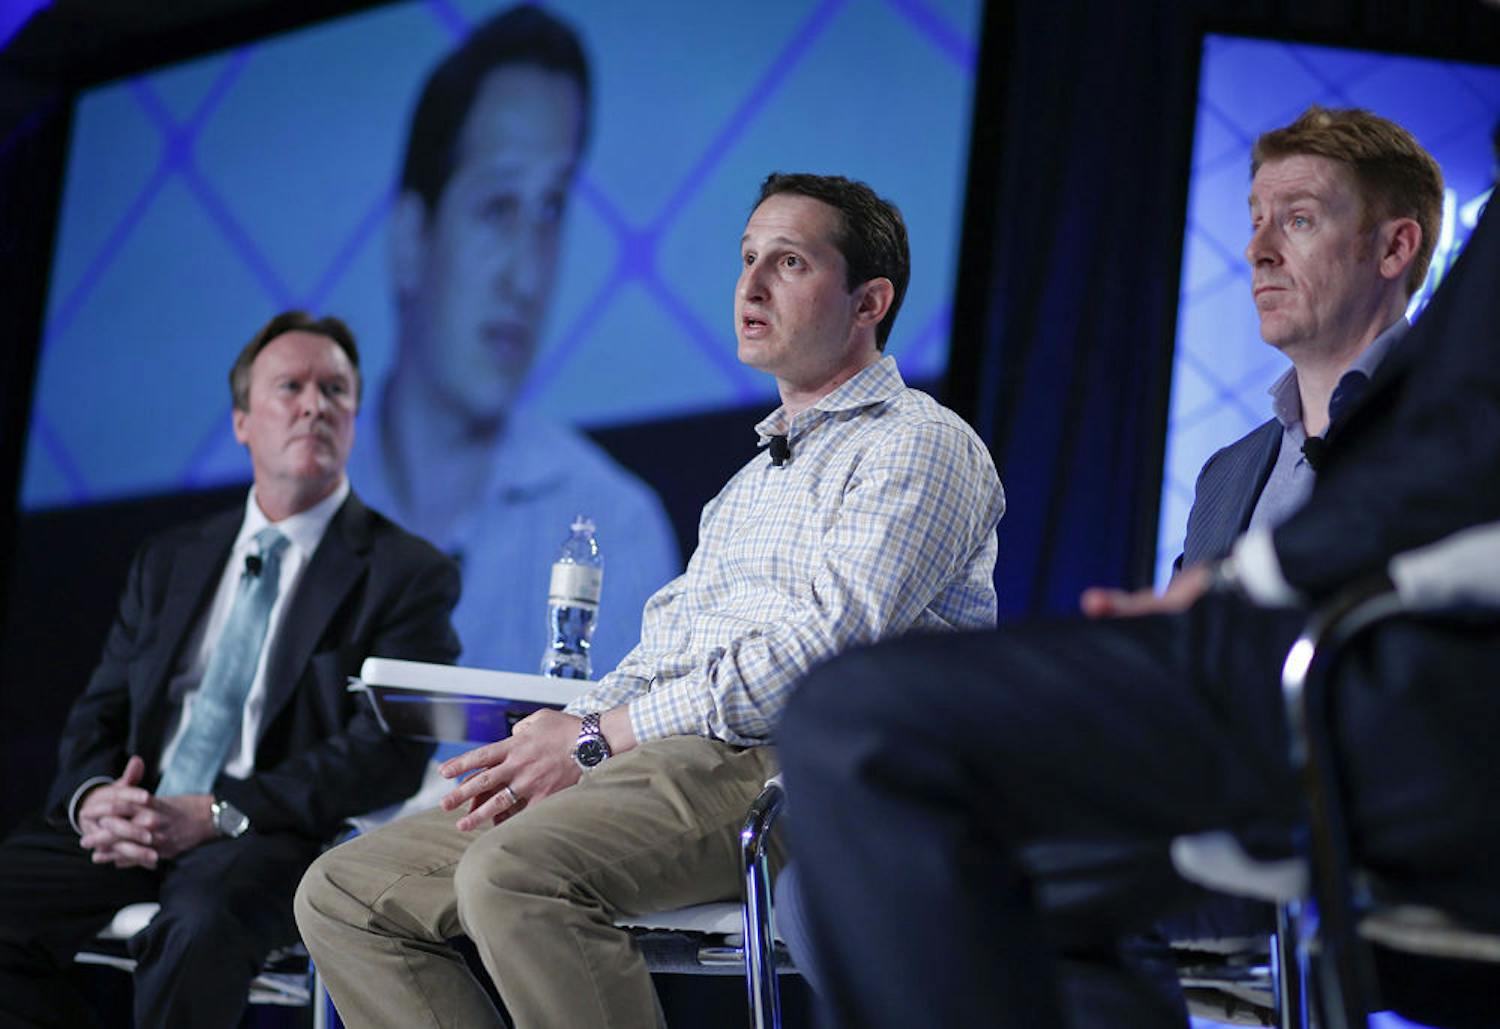 Jason Robins, center, CEO of DraftKings, speaks on a panel at the Global Gaming Expo in Las Vegas.